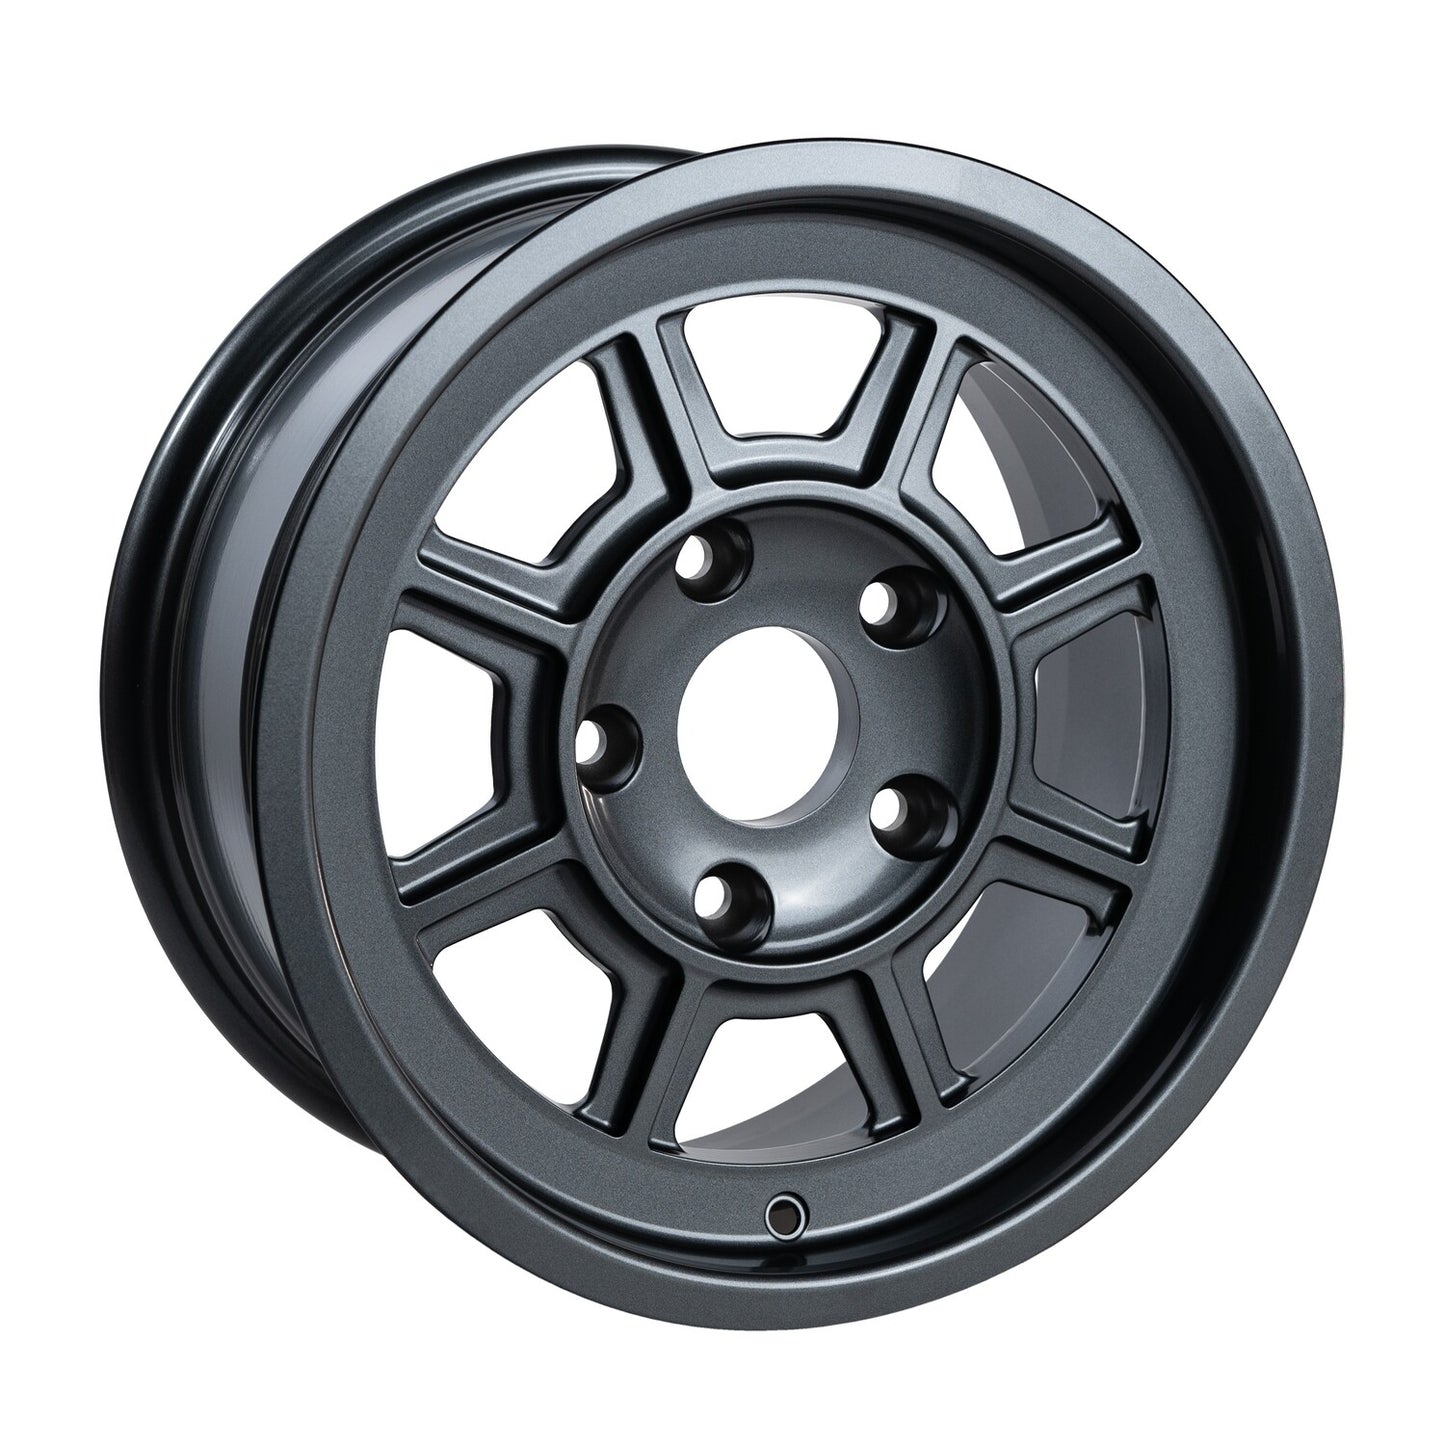 PAG1590P 15" x 9" Alloy Campy Wheels - Sierra Madre Collection